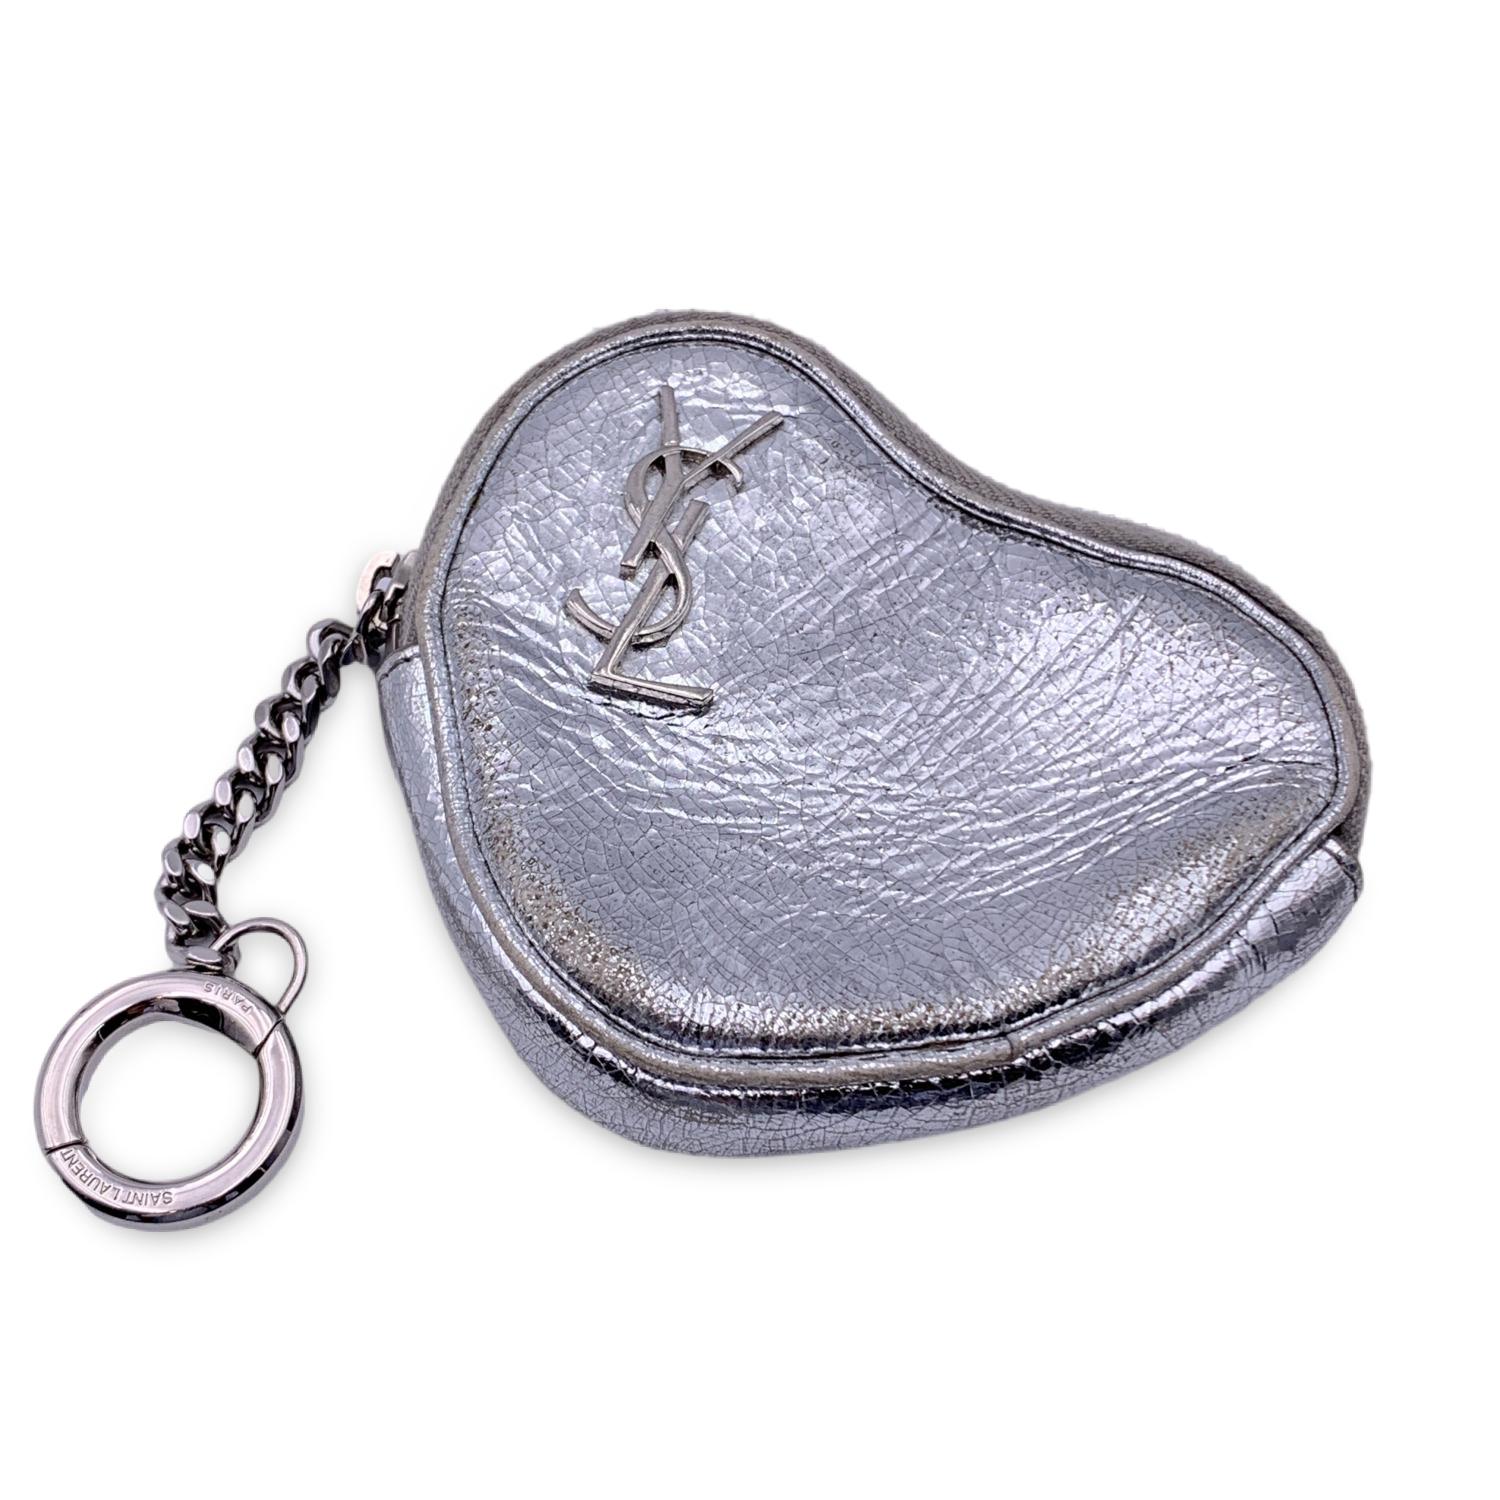 Saint Laurent Heart coin purse. Silver metal leather with YSL logo o the front. Upper zipper closure. keychain. 'Saint Laurent Paris' embossed inside

Details

MATERIAL: Leather

COLOR: Silver

MODEL: n.a.

GENDER: Women

COUNTRY OF MANUFACTURE: